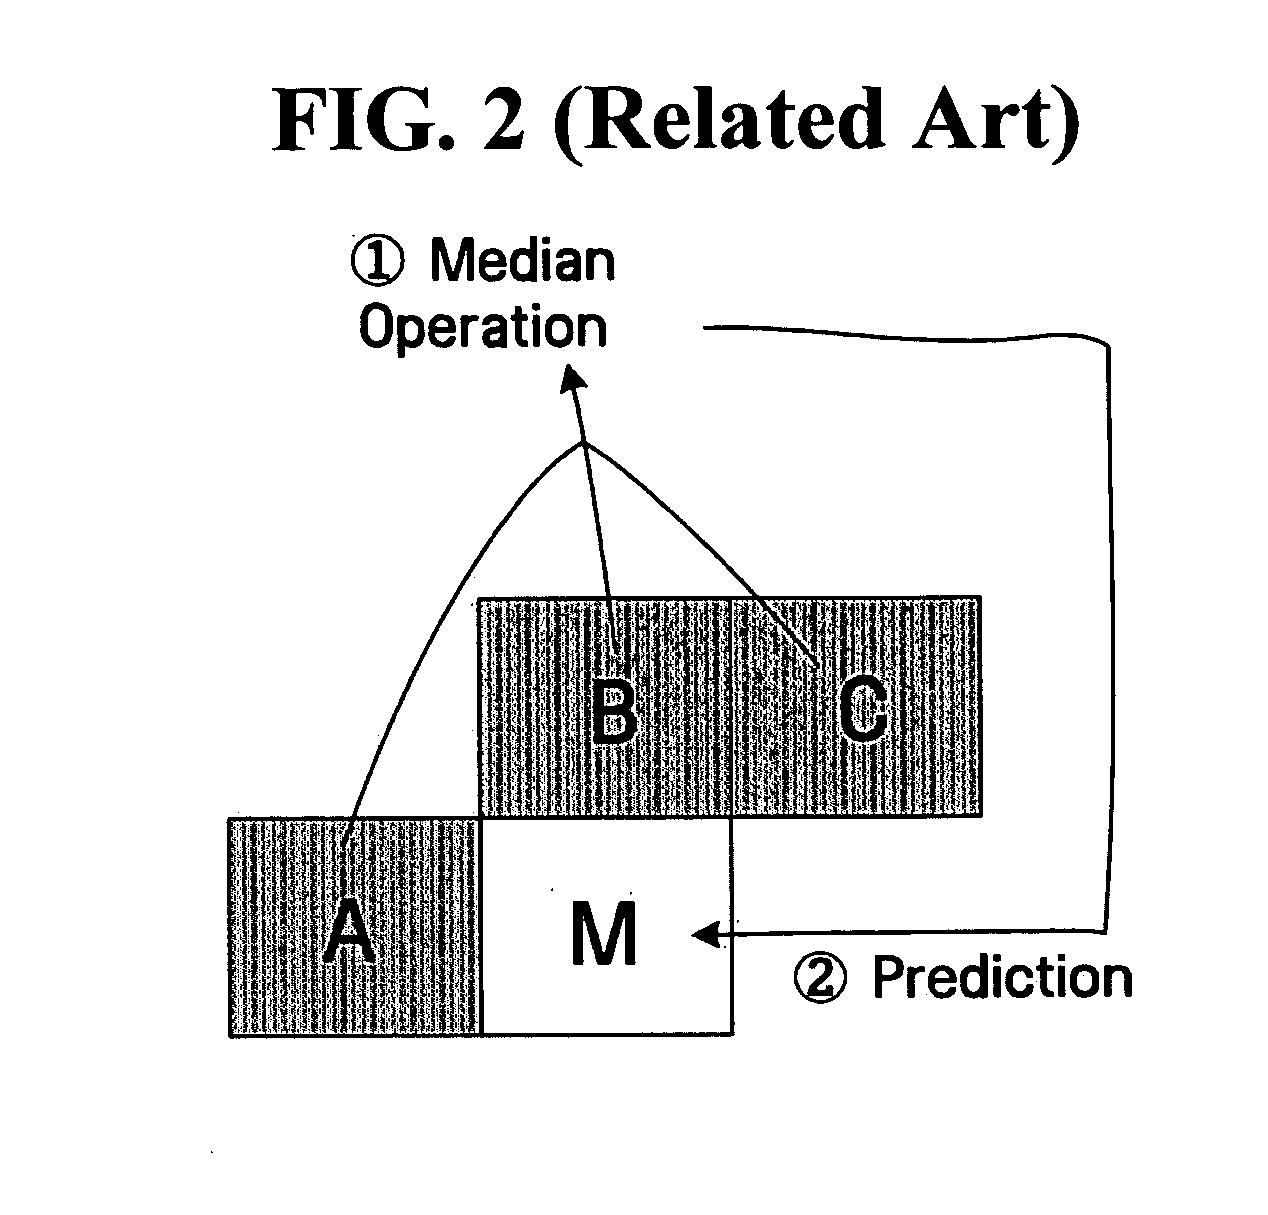 Video encoding/decoding method and apparatus using motion prediction between temporal levels